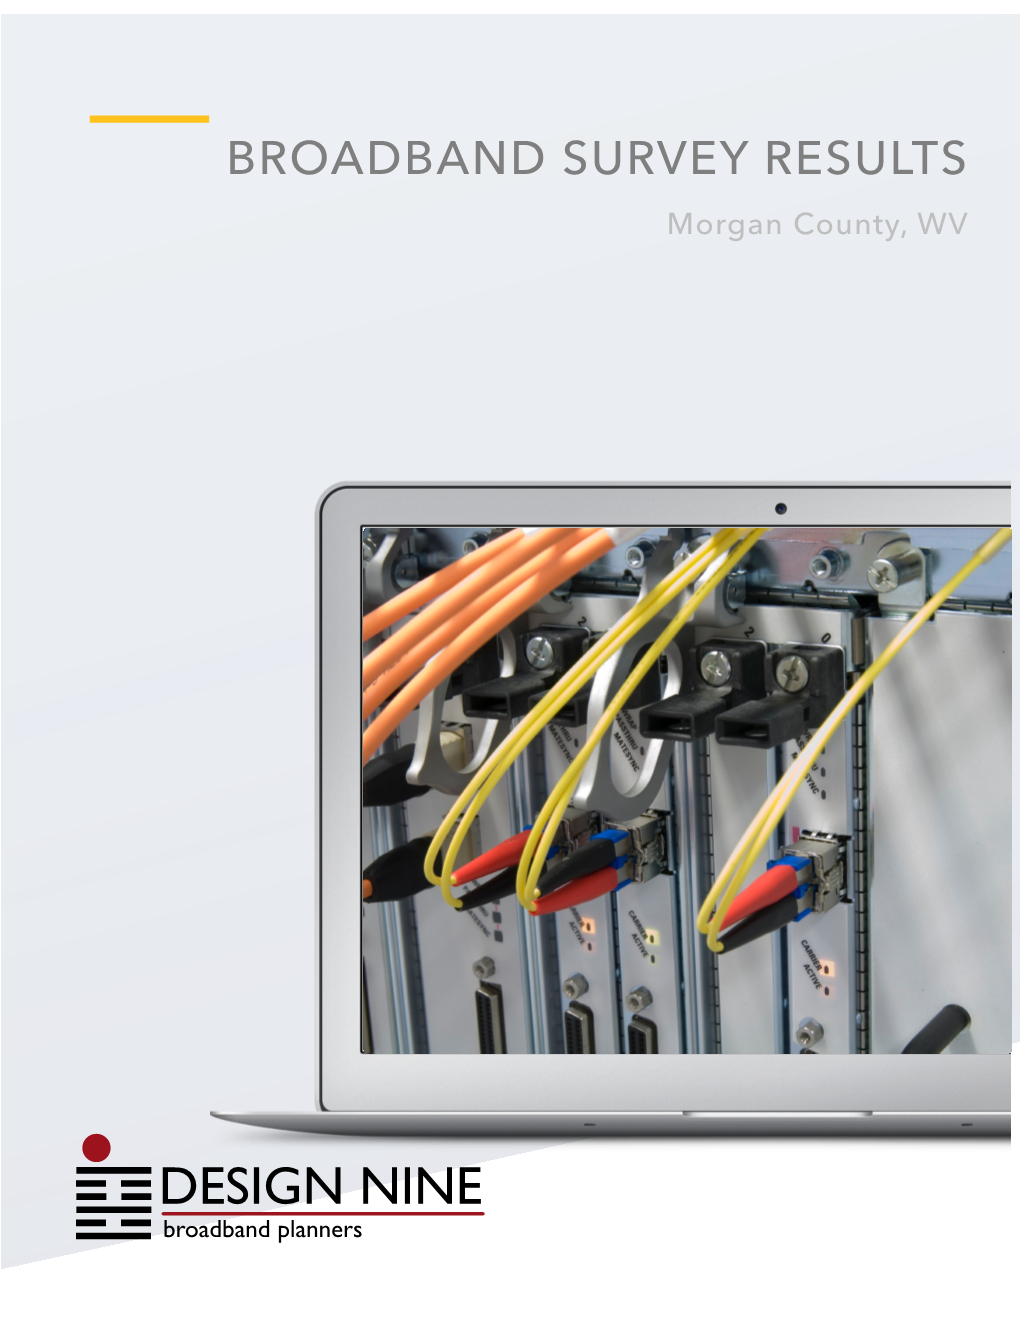 DESIGN NINE Broadband Planners TABLE of CONTENTS